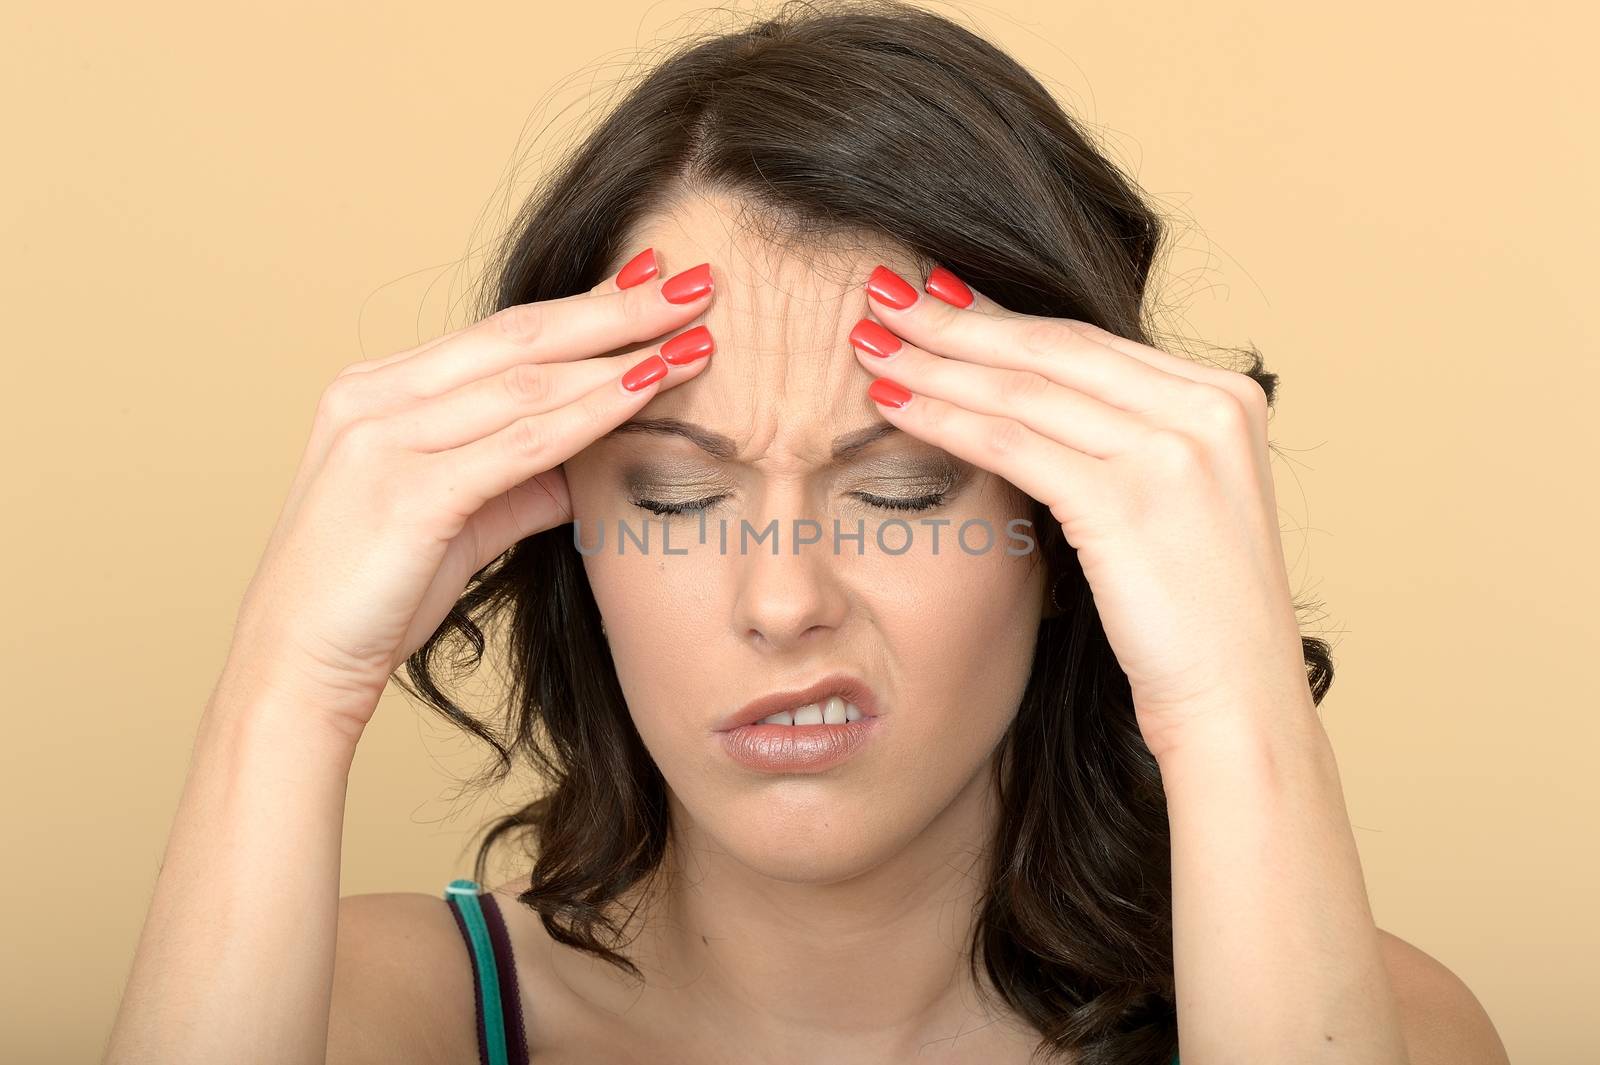 Attractive Young Woman With a Painful Headache Holding Her Head